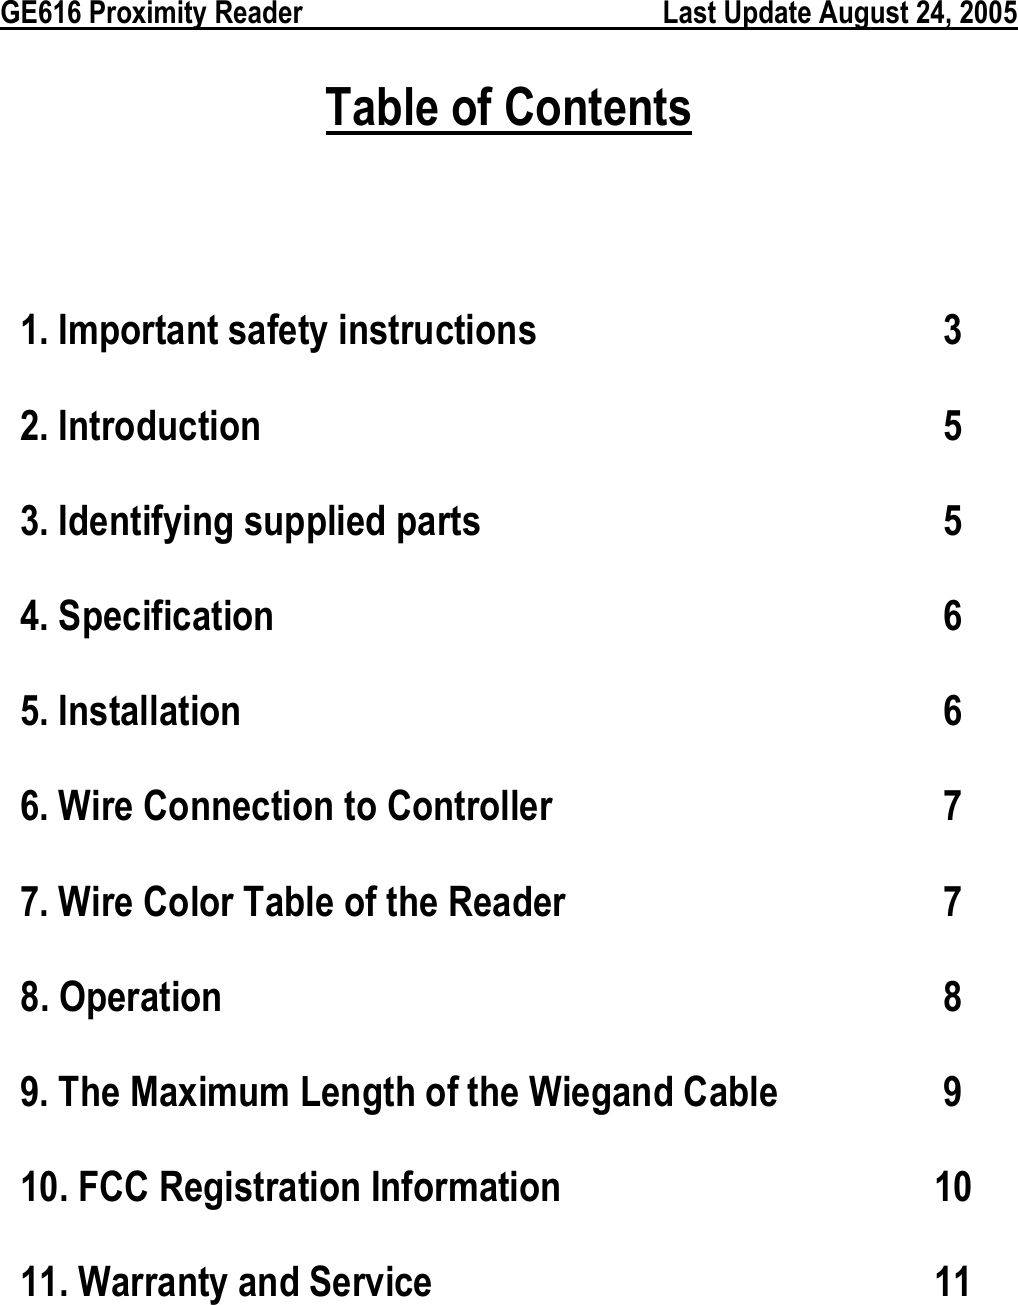  GE616 Proximity Reader        Last Update August 24, 2005 Table of Contents  1. Important safety instructions   3 2. Introduction 5 3. Identifying supplied parts  5 4. Specification  6 5. Installation  6 6. Wire Connection to Controller    7 7. Wire Color Table of the Reader    7 8. Operation  8 9. The Maximum Length of the Wiegand Cable  9 10. FCC Registration Information  10 11. Warranty and Service  11   